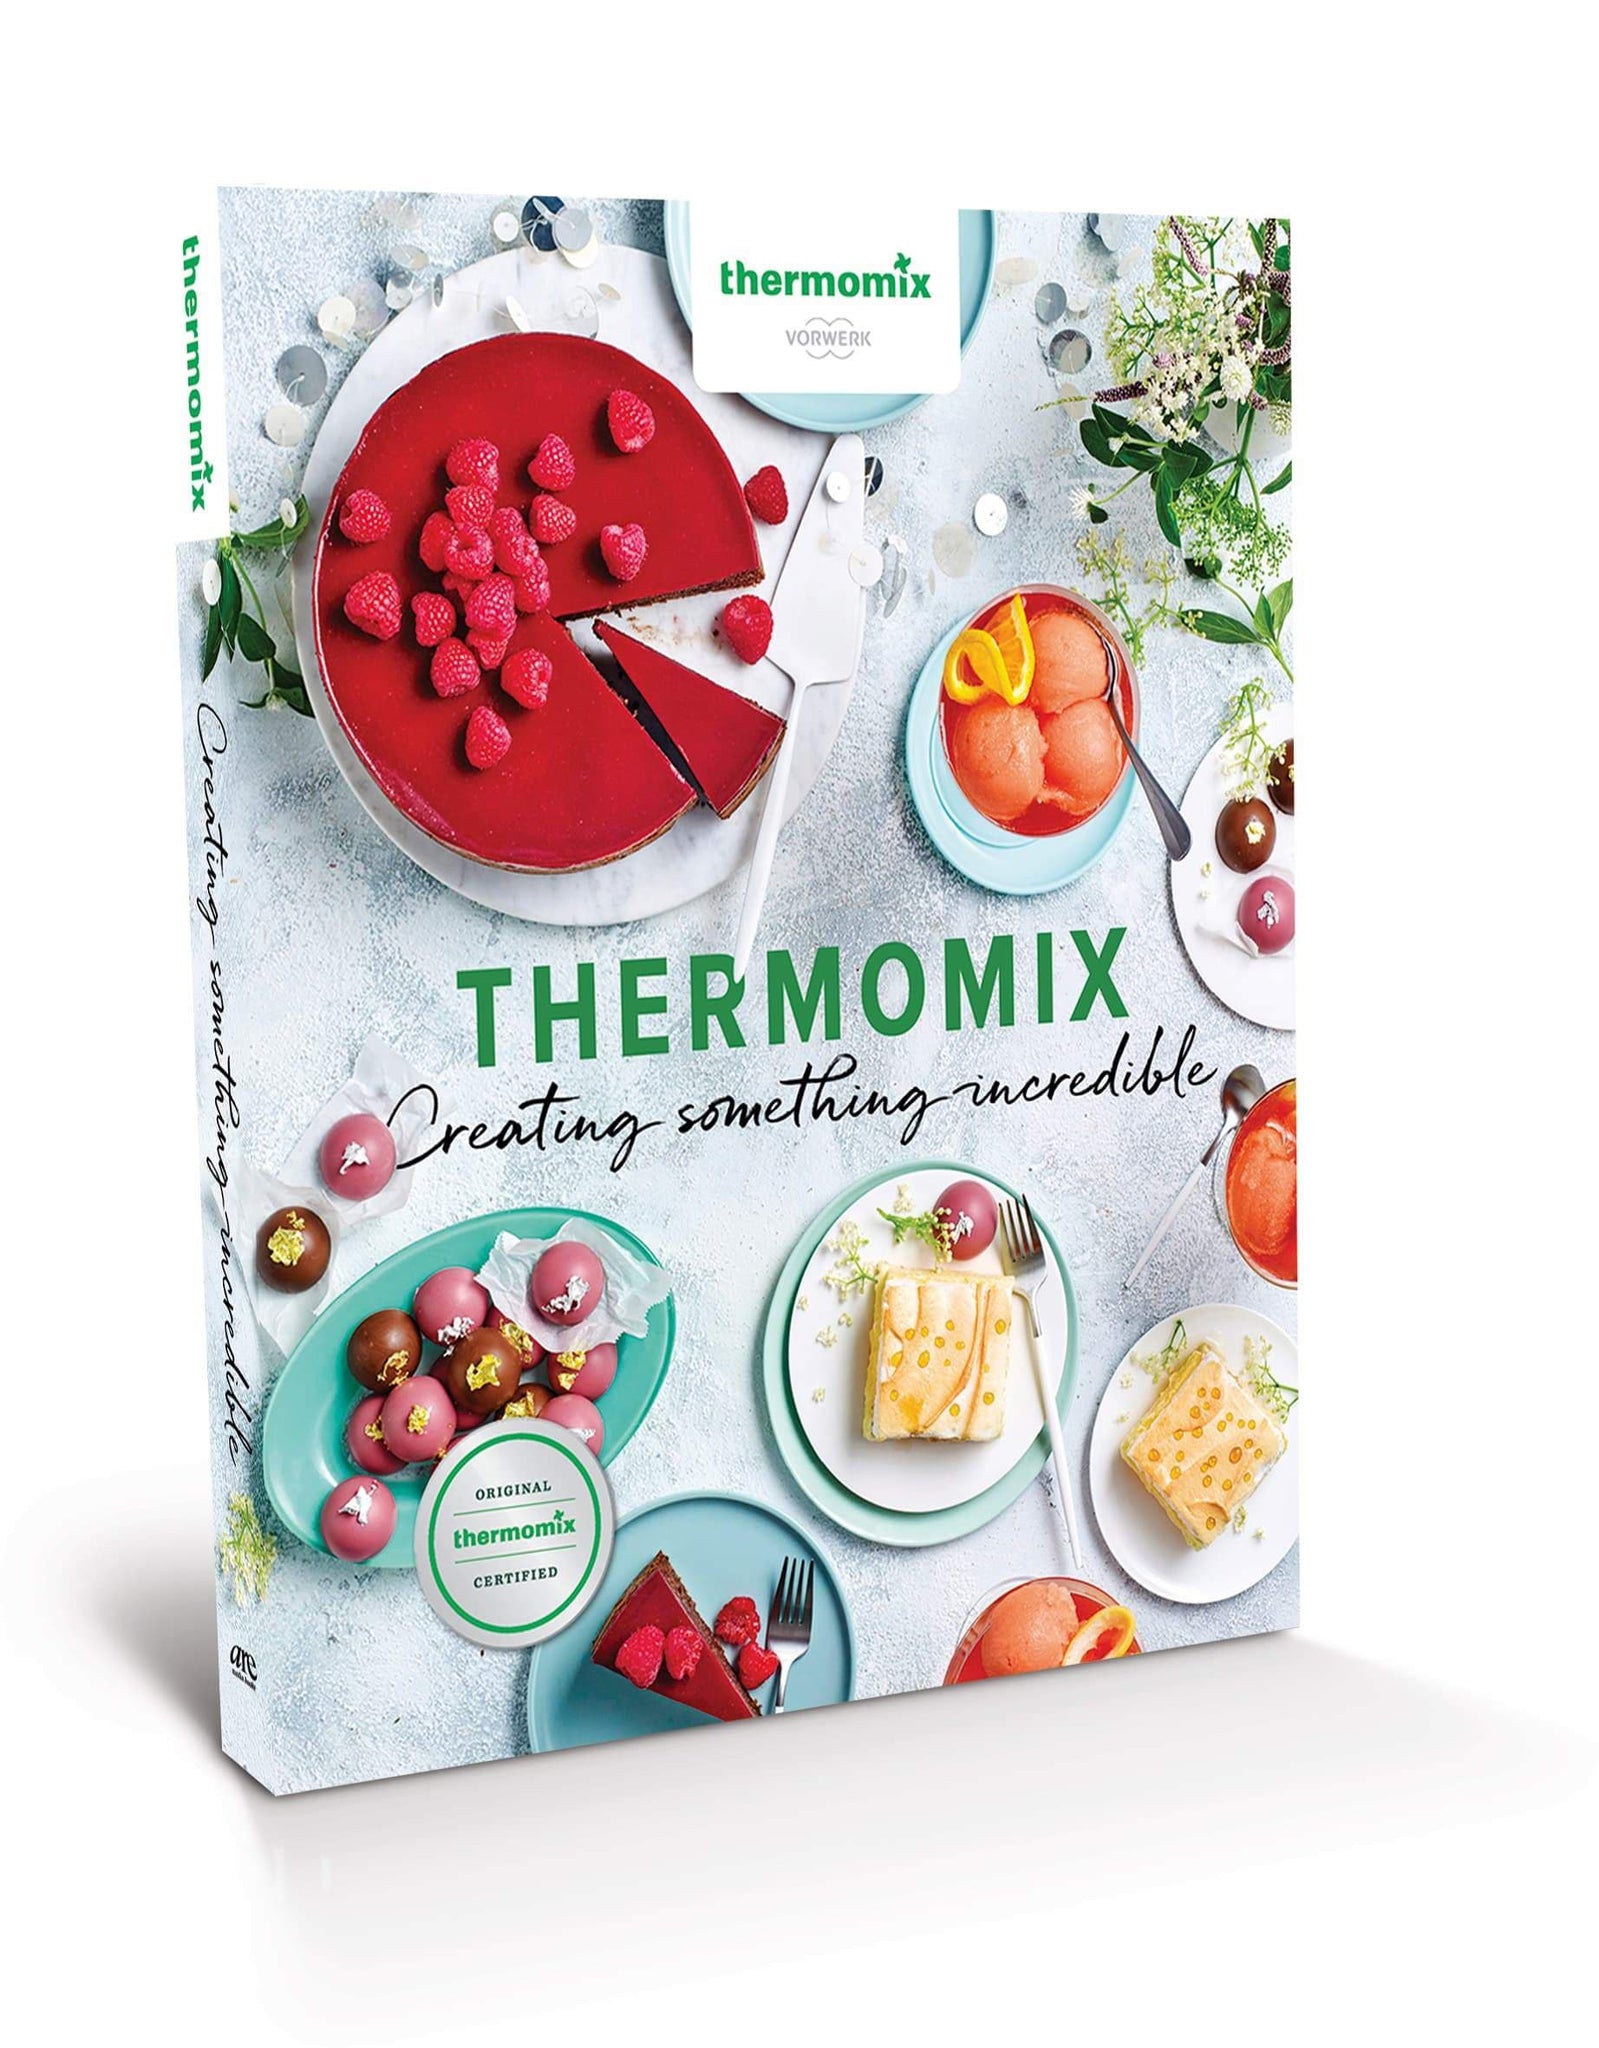 Thermomix-New-Zealand Thermomix Thermomix: Creating Something Incredible Cookbook Cookbook